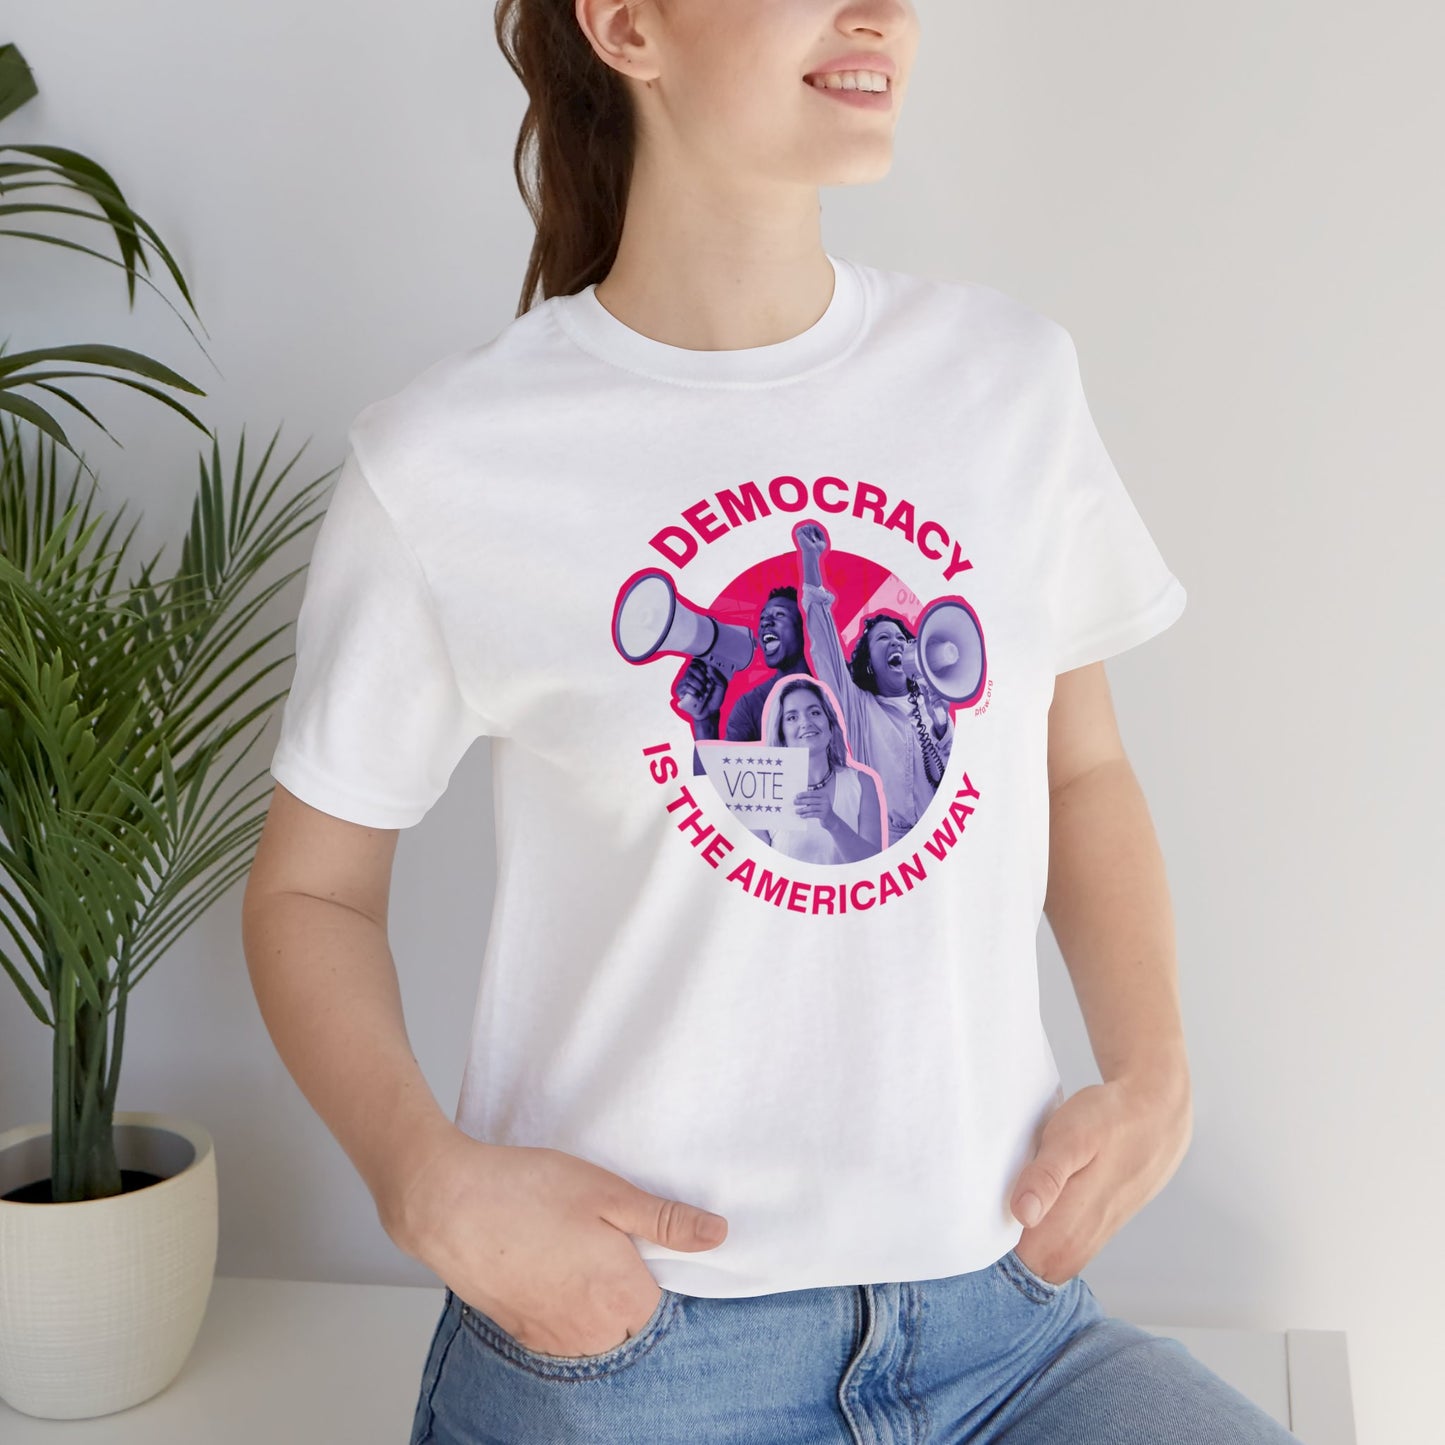 Democracy is the American Way Shirt